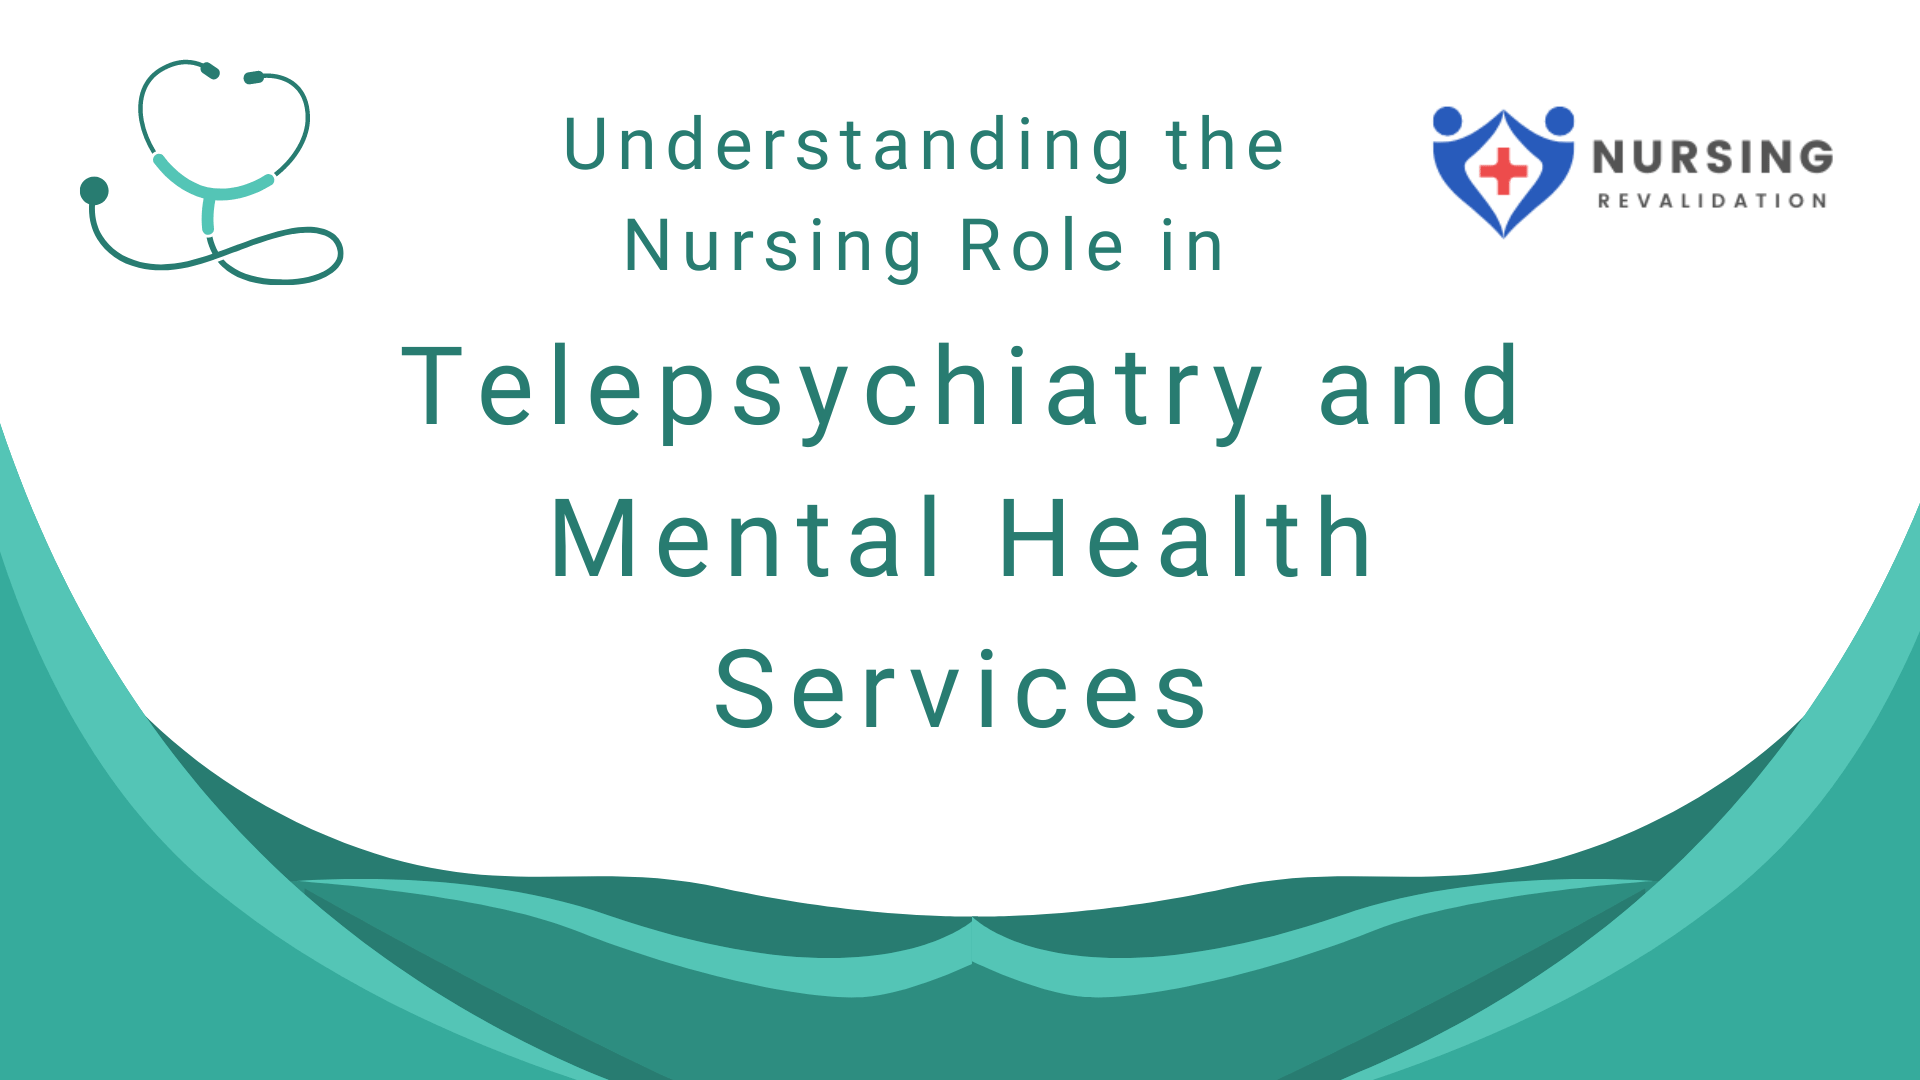 Understanding the Nursing Role in Telepsychiatry and Mental Health Services